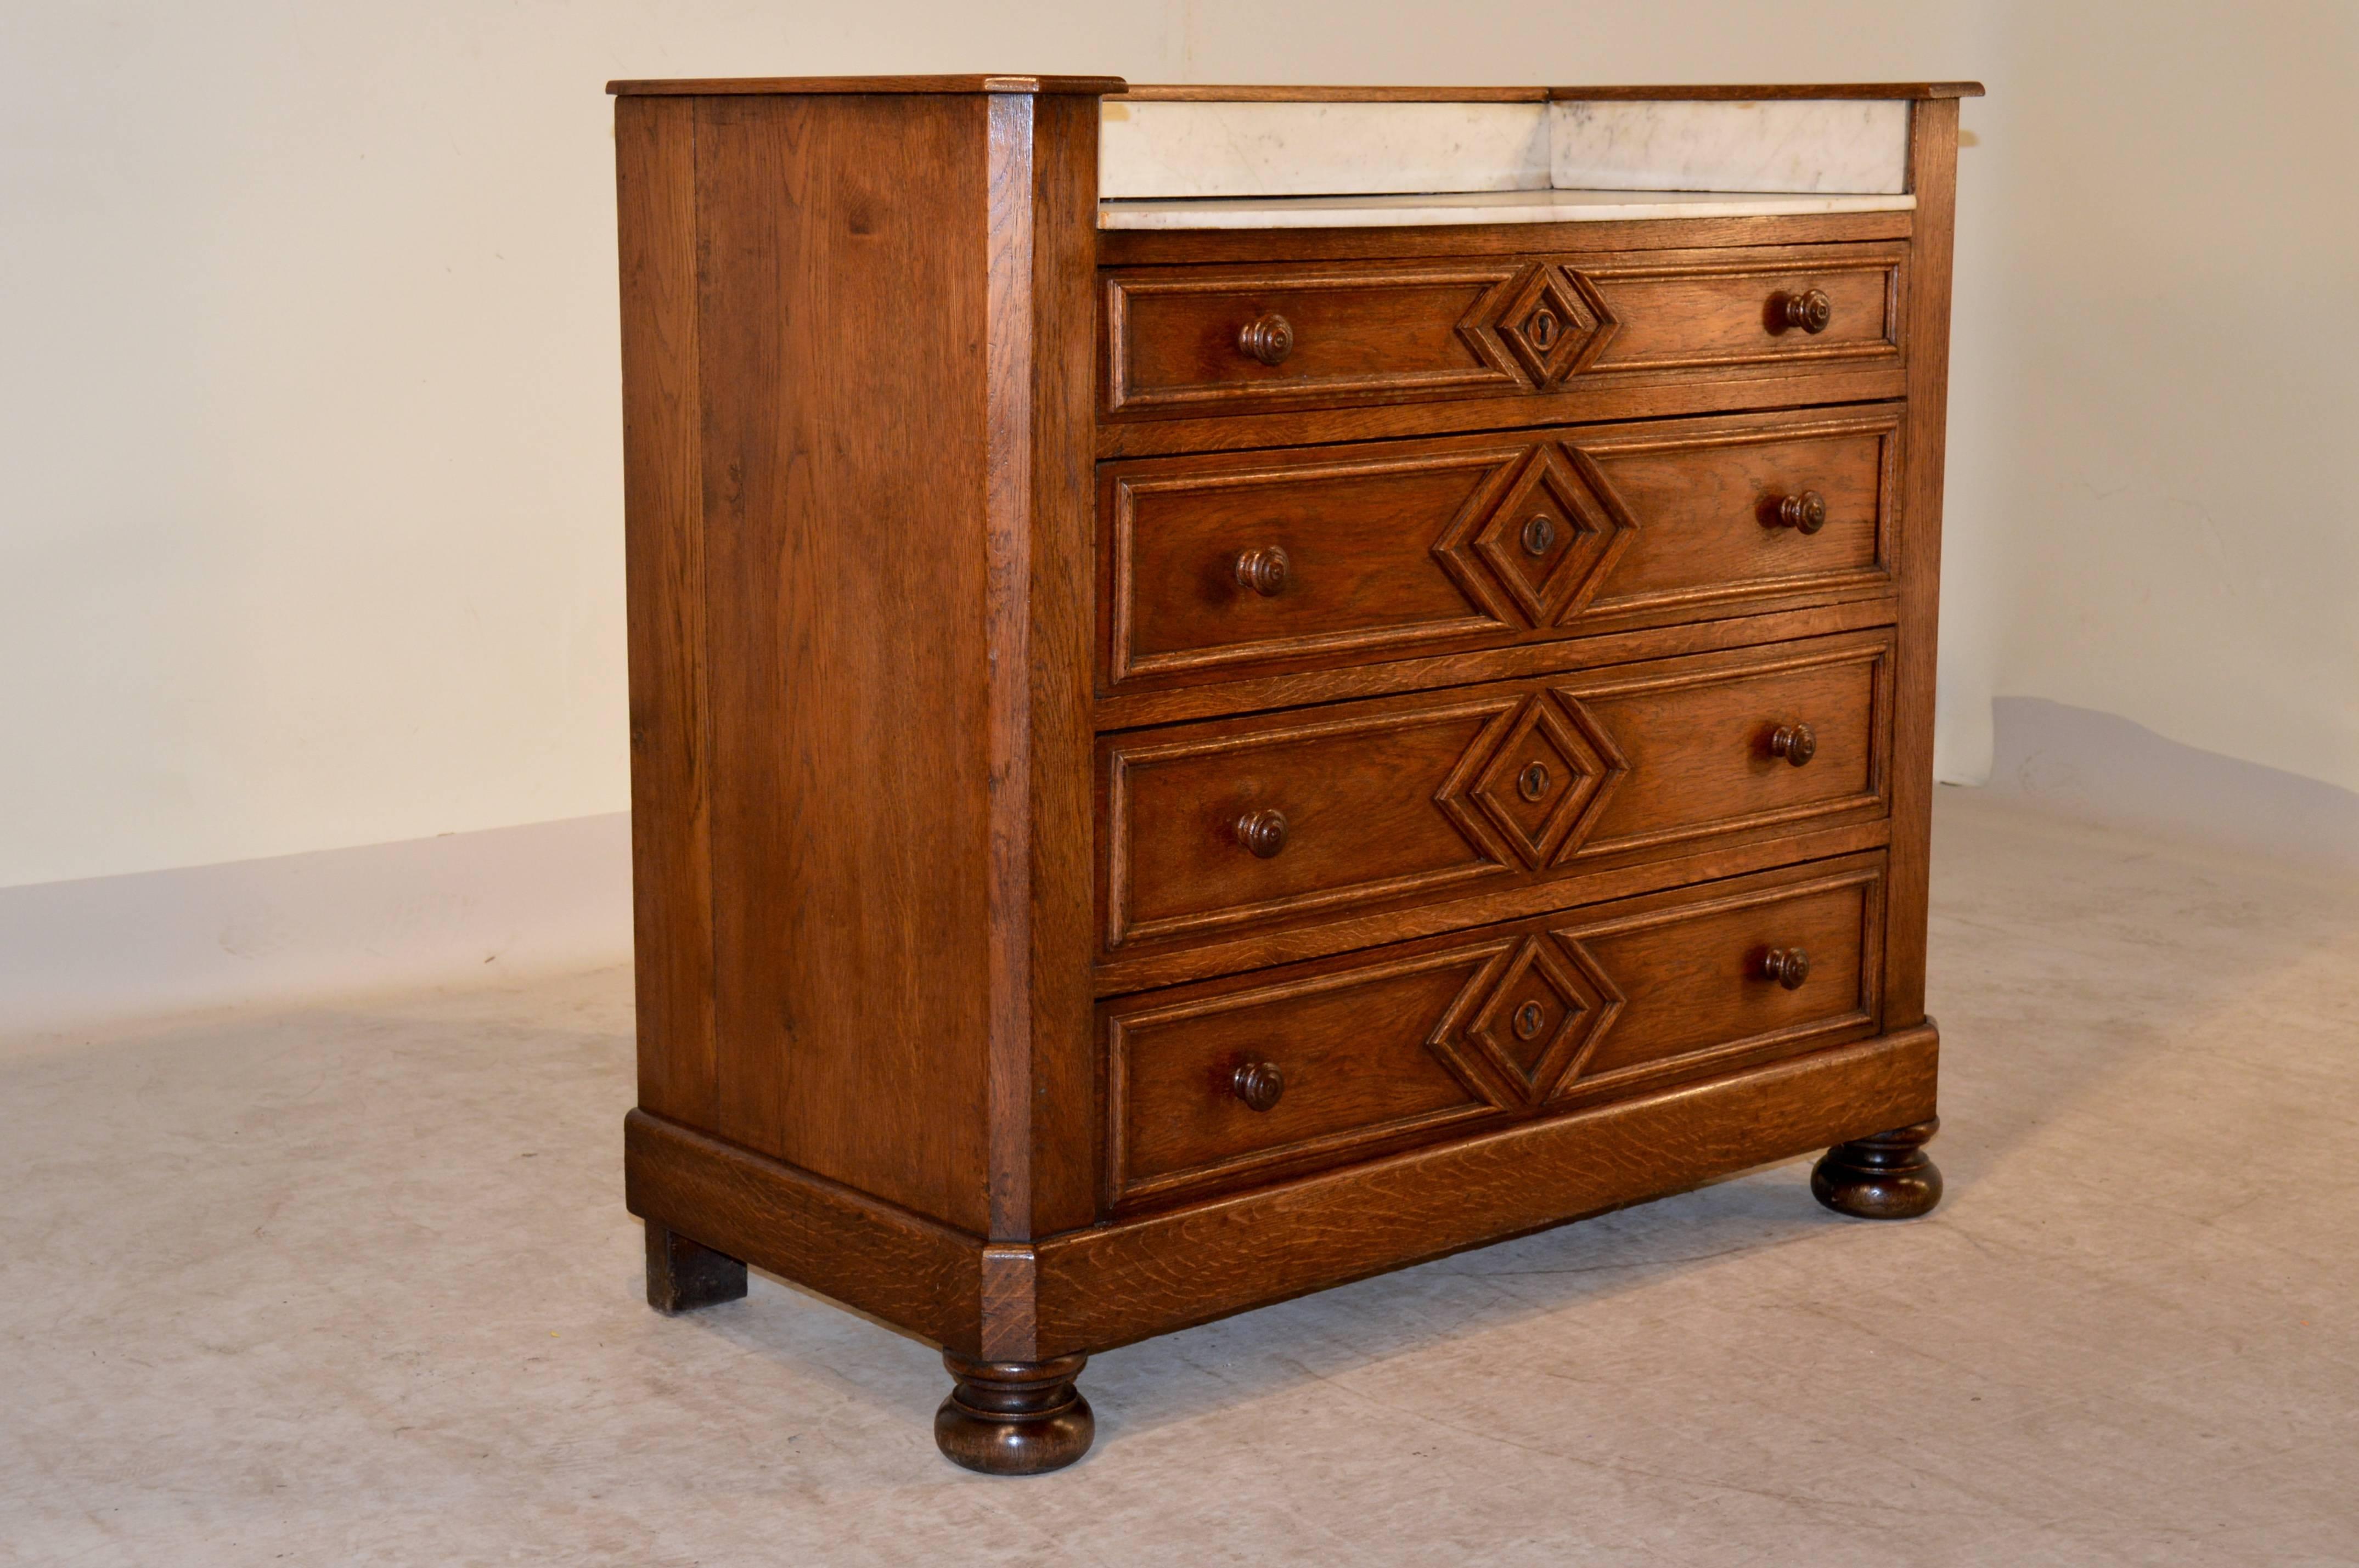 19th century French wash stand made from oak with marble top and backsplash, simple sides, and four drawers with lovely applied molded drawer fronts in a geometric pattern. Raised on bun feet. Counter height is 32.38.